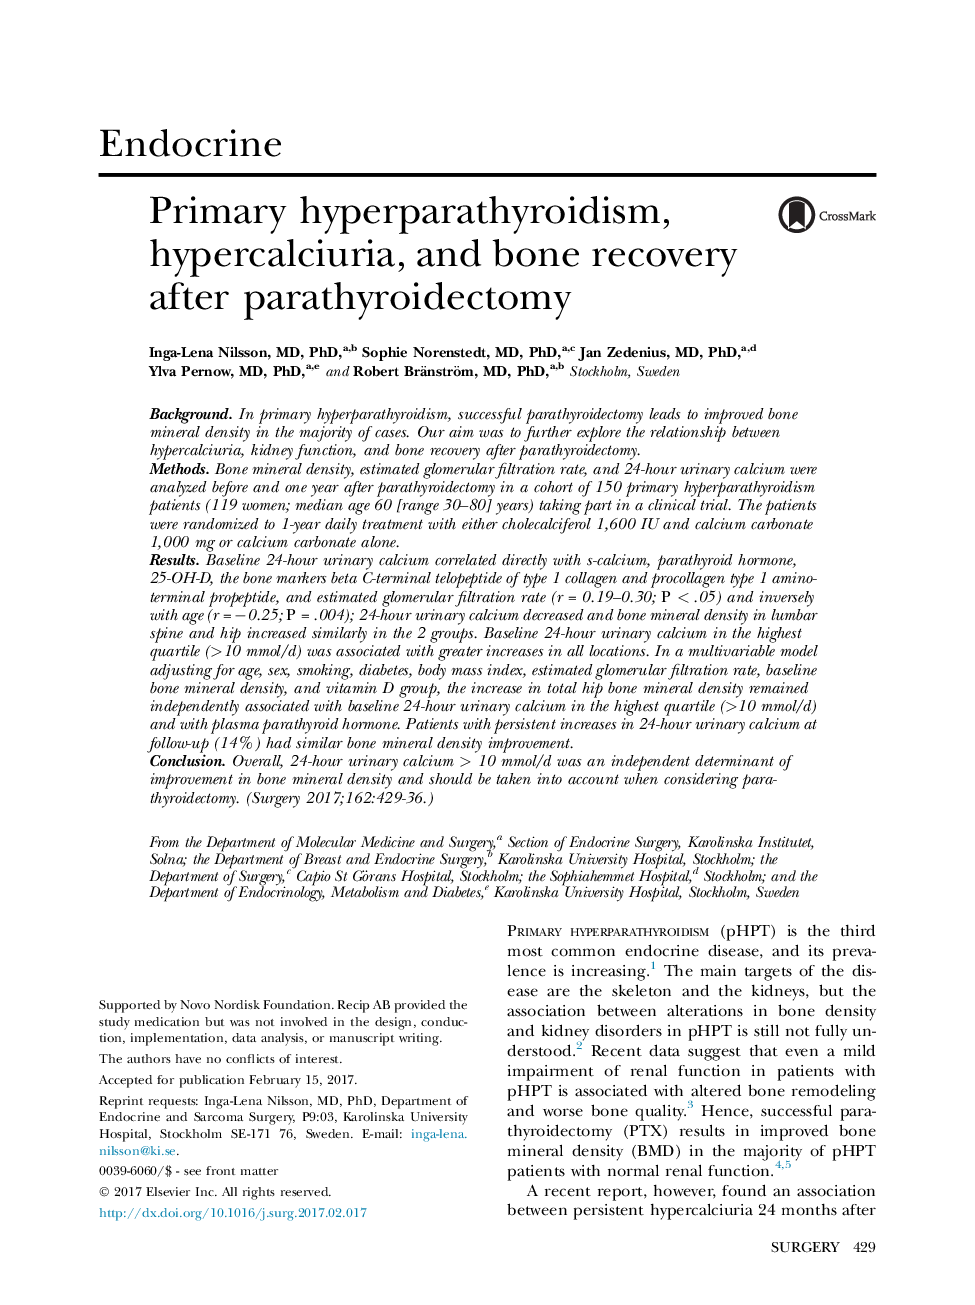 EndocrinePrimary hyperparathyroidism, hypercalciuria, and bone recovery after parathyroidectomy